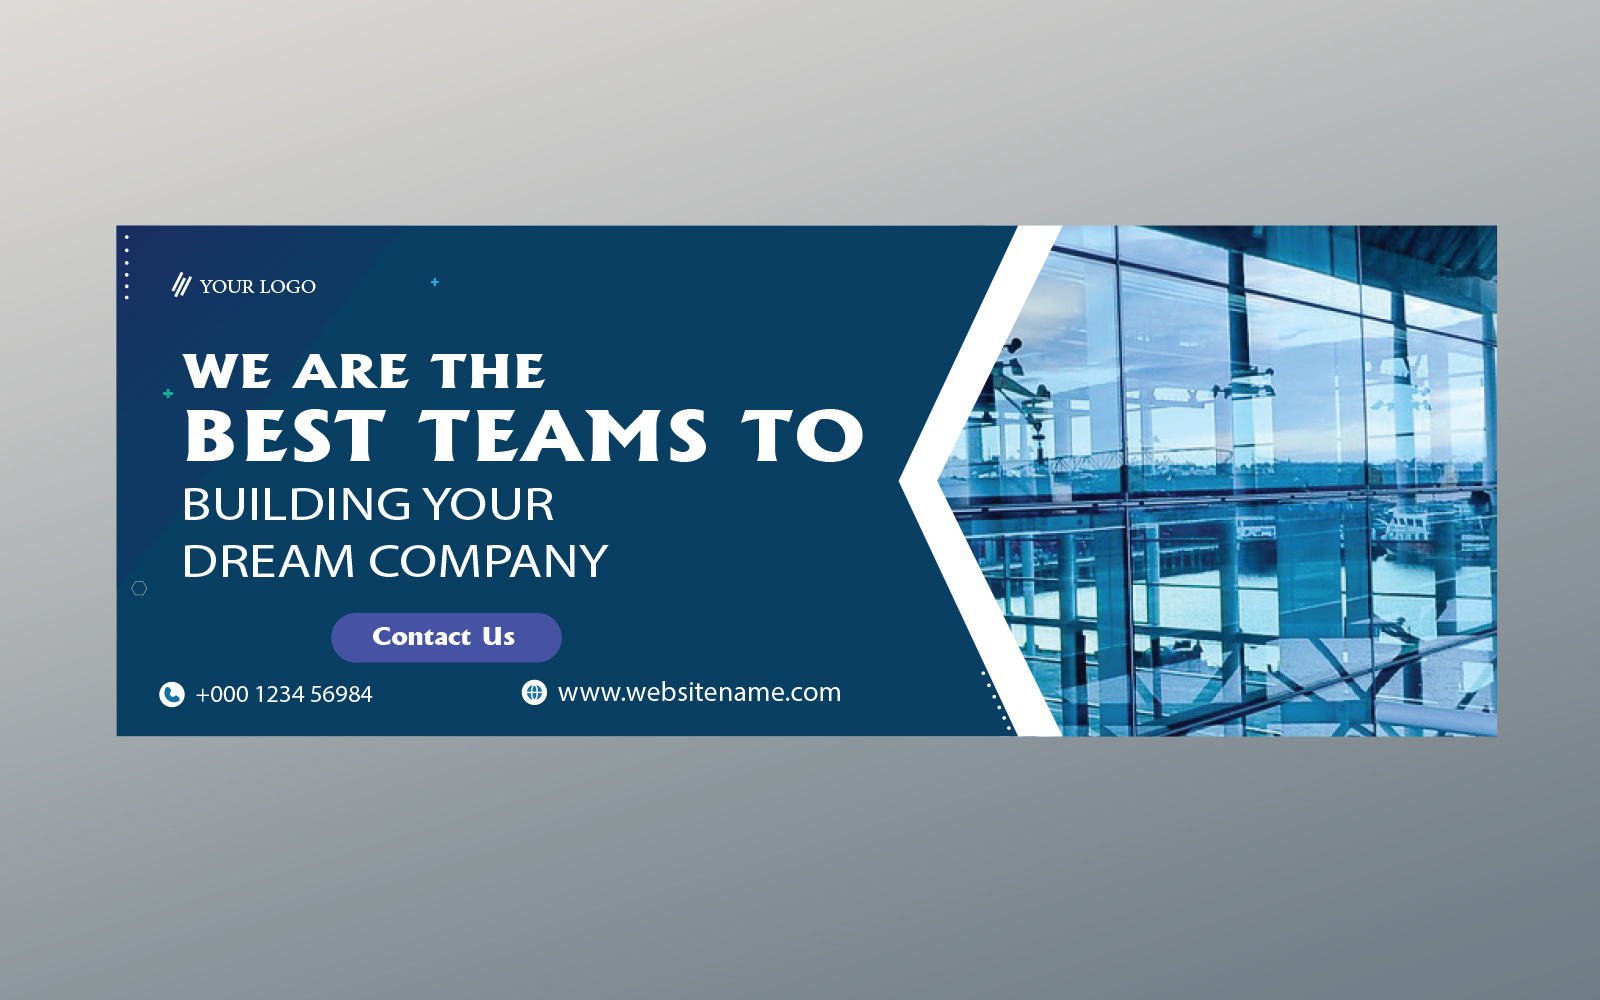 Facebook Cover Banner Design Template for Company Building